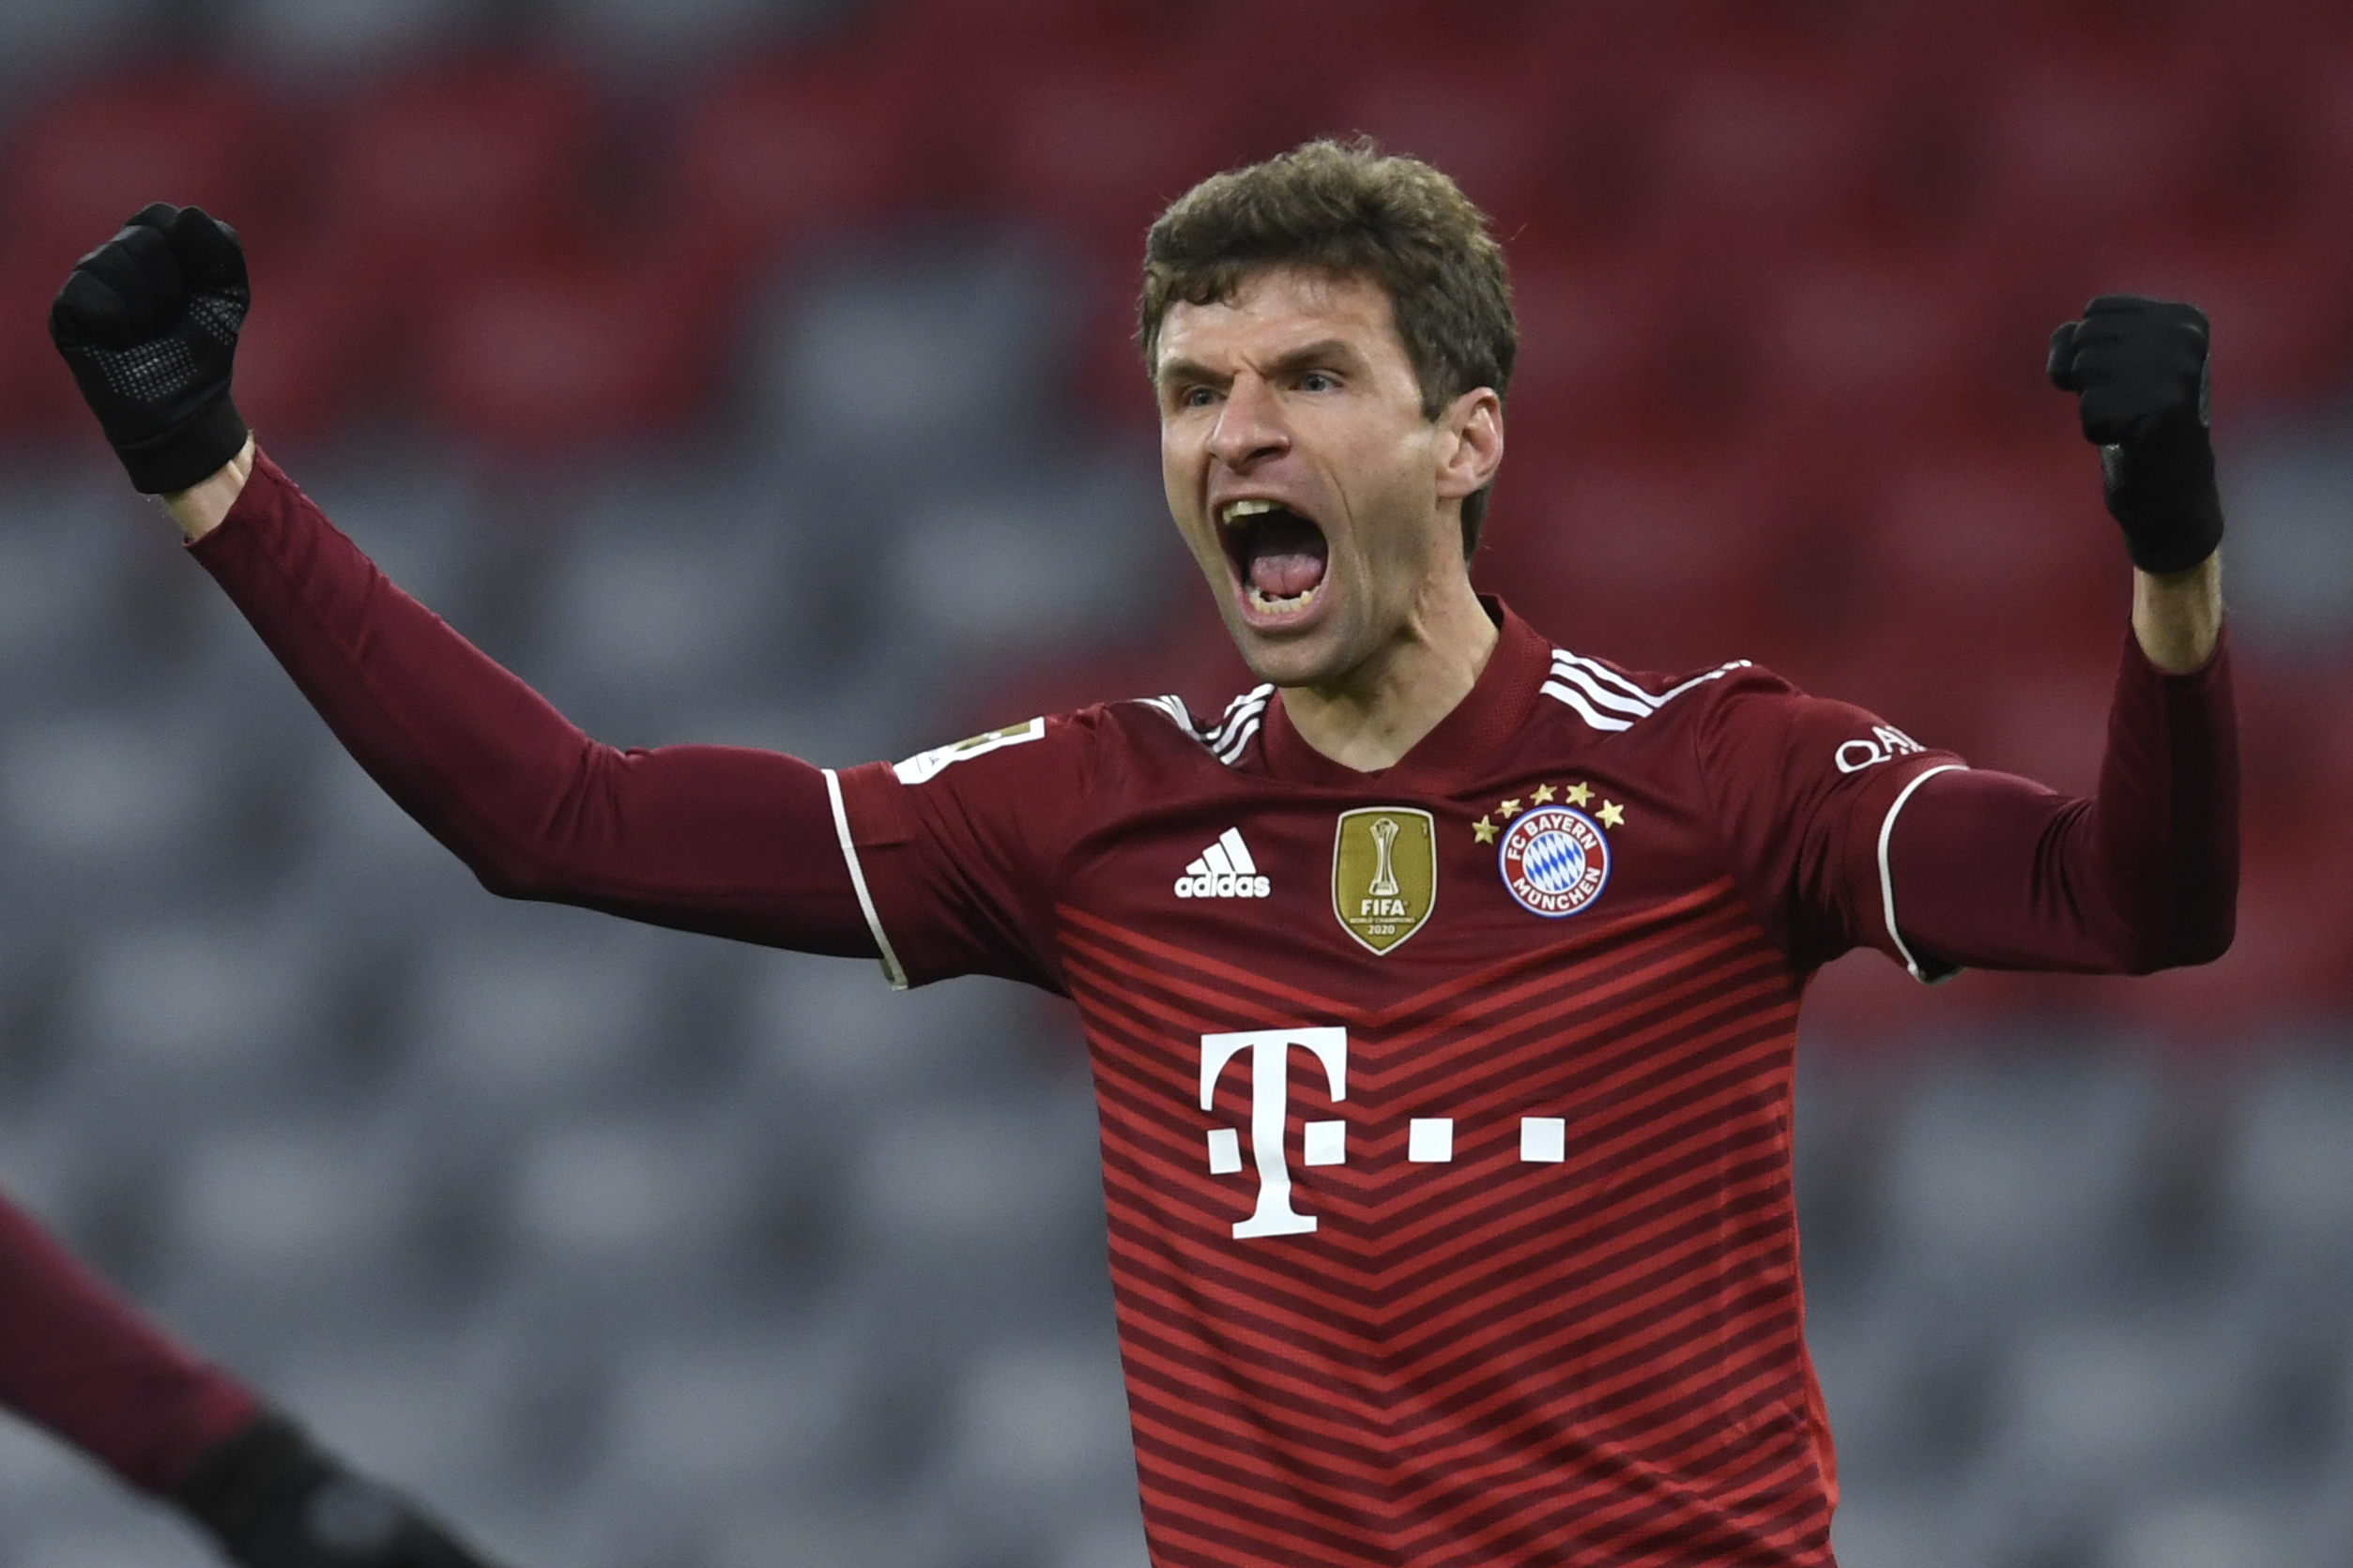 Bayern's Thomas Mueller celebrates after scoring his sides first goal during a German Bundesliga soccer match between Bayern Munich and VfL Wolfsburg at the Allianz Arena in Munich, Germany, Friday, Dec. 17, 2021. (AP Photo/Andreas Schaad)